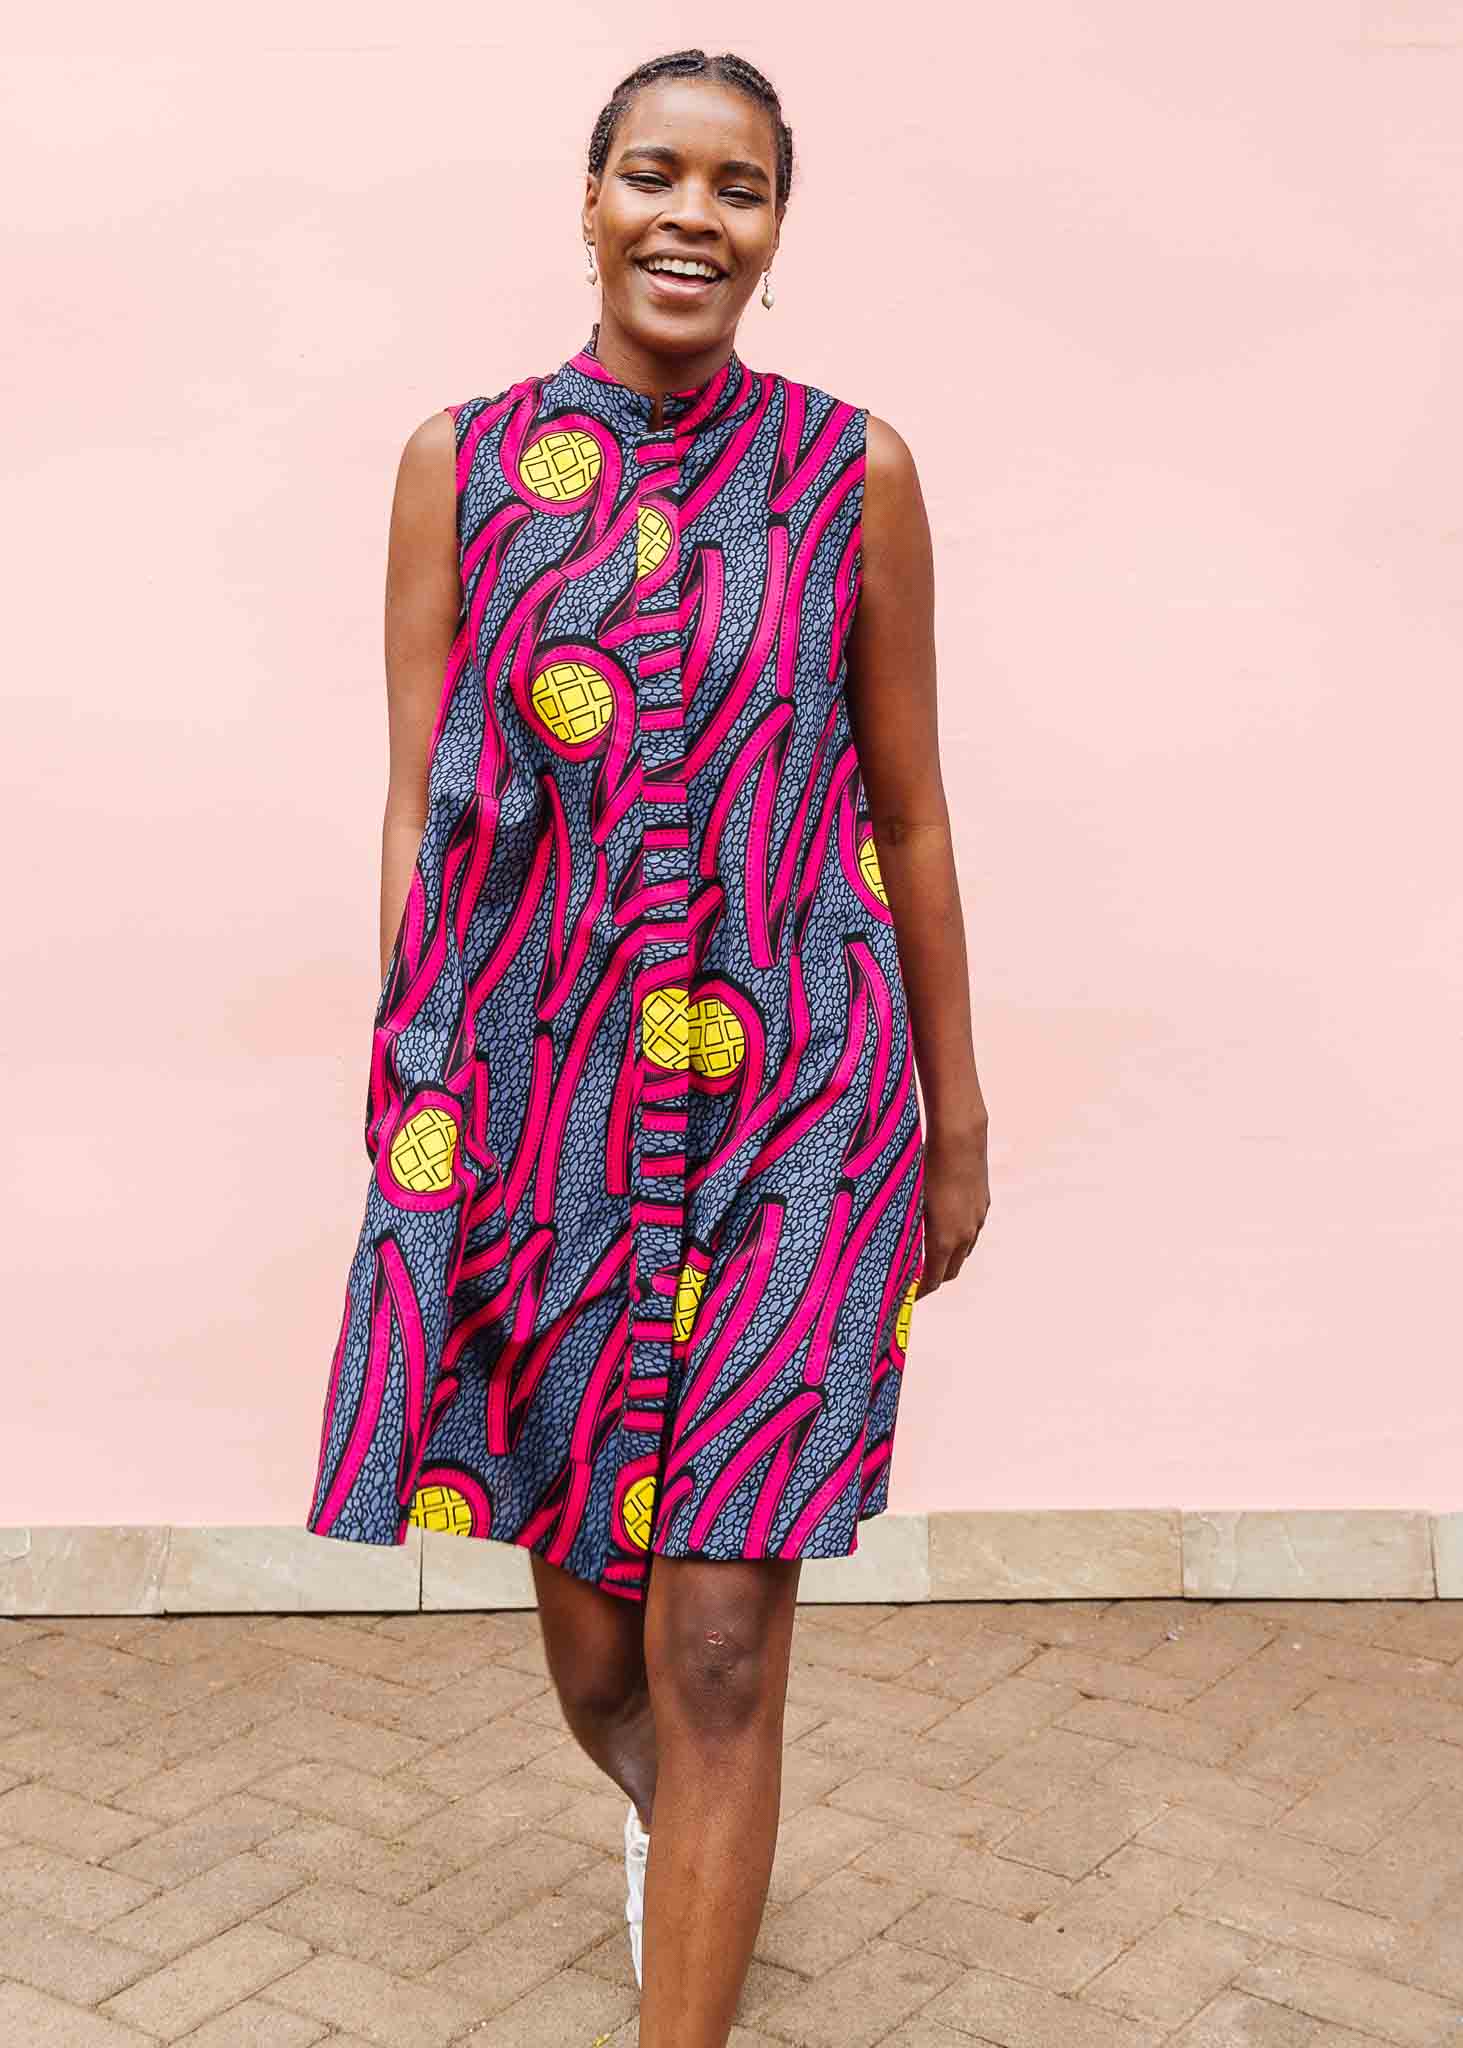 Model wearing sleeveless gray dress with bold pink lines and yellow circles.